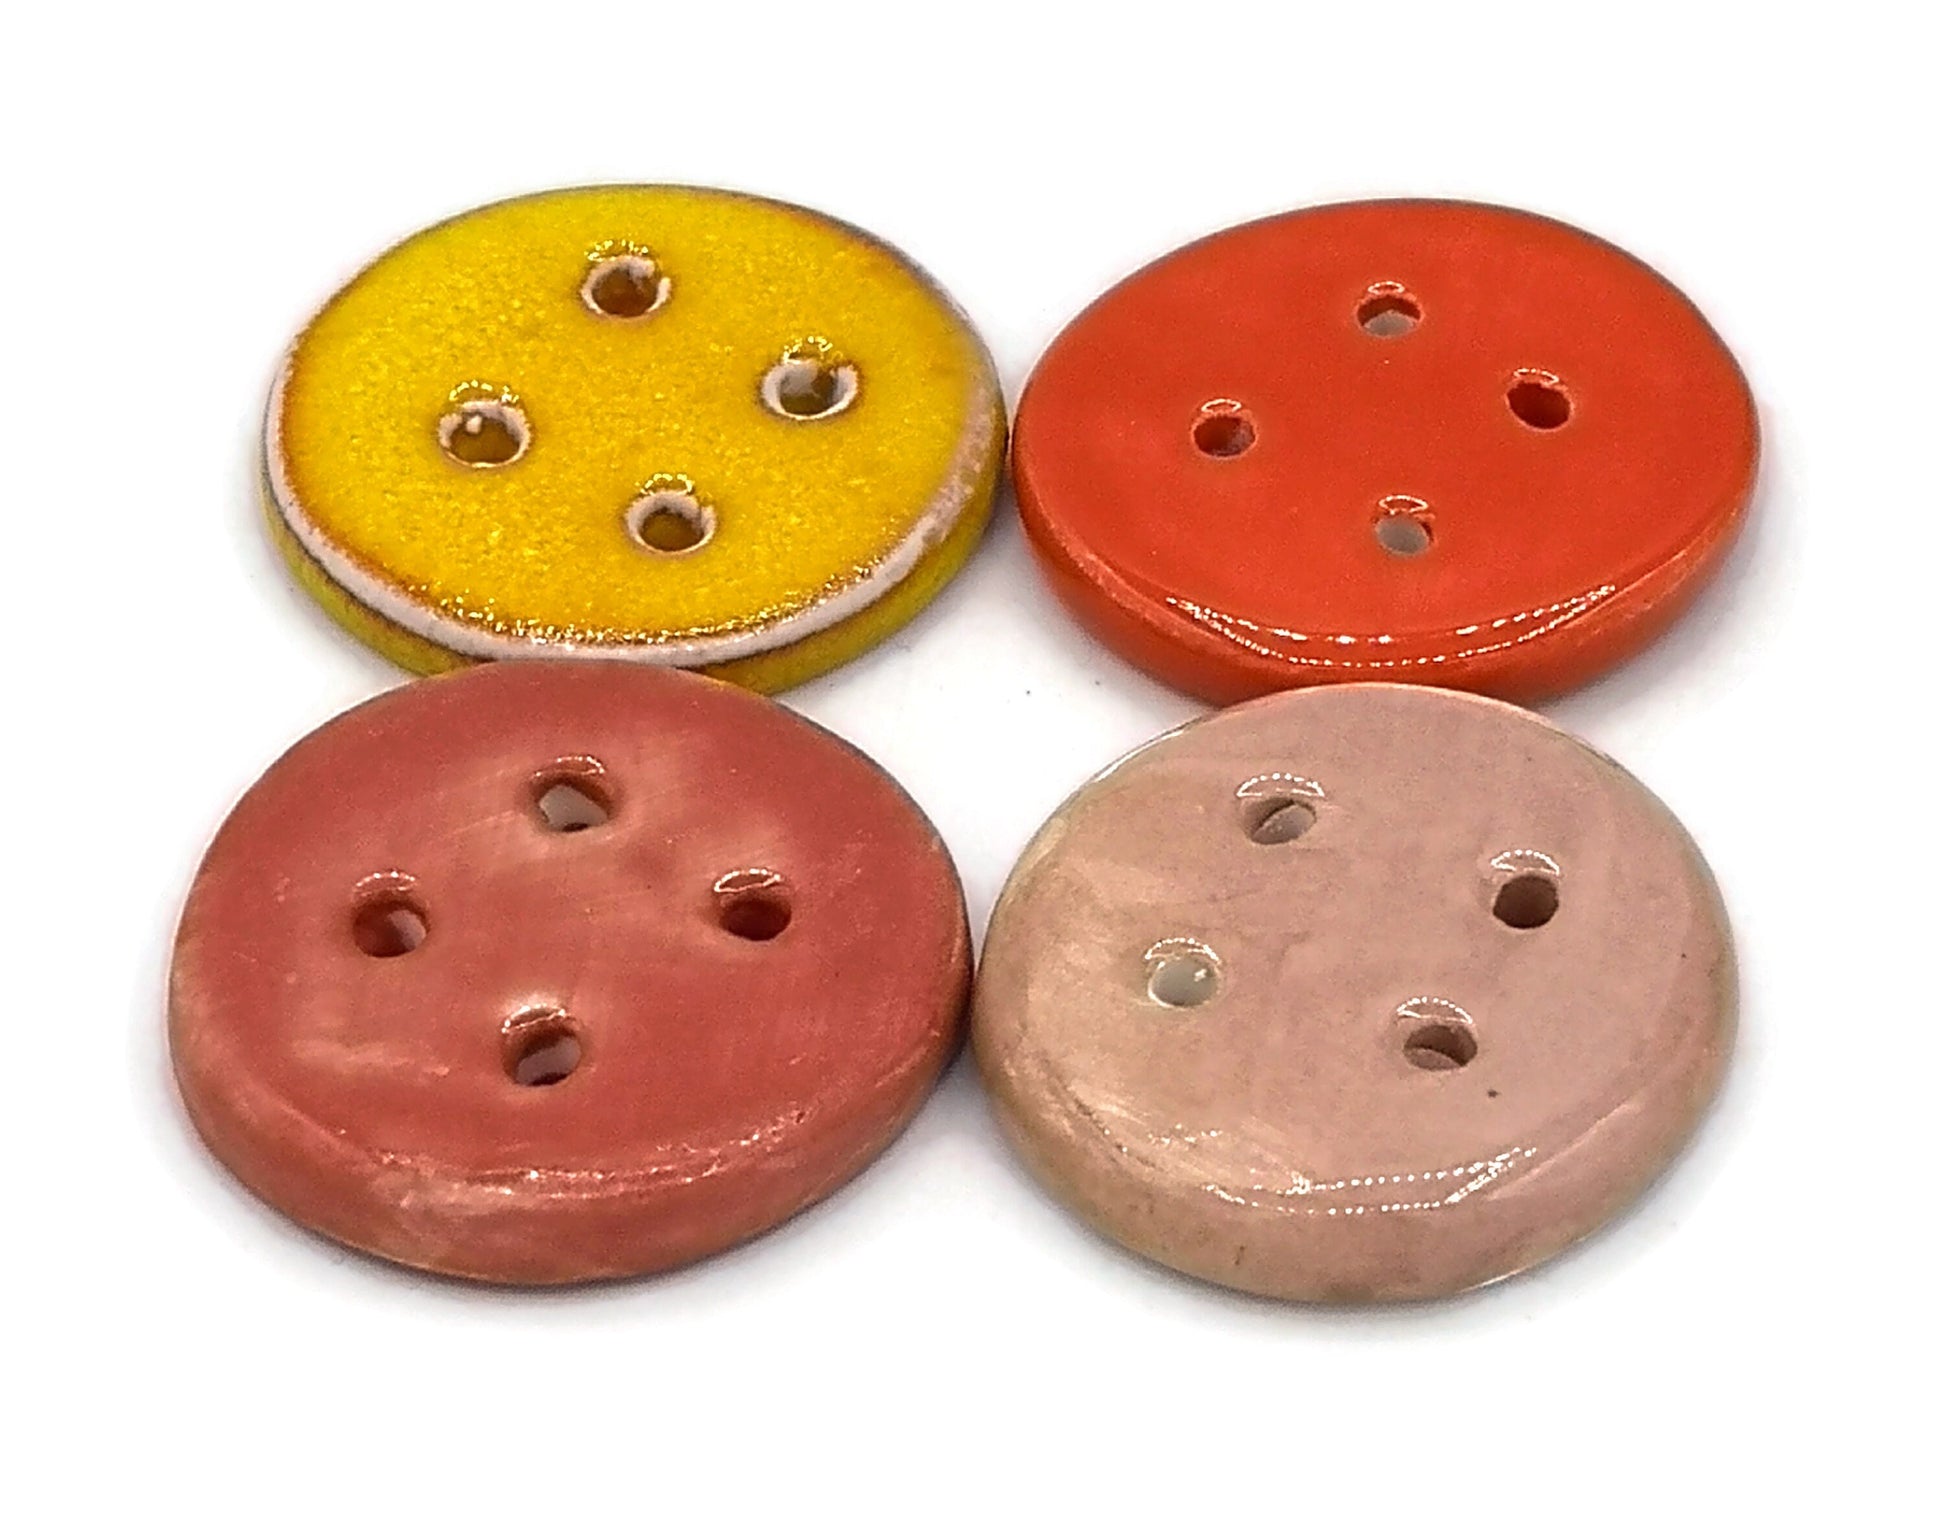 Clay Buttons Lot Of 4, Round Large Sewing Buttons, Jewelry making, Best sellers Sewing Supplies And Notions, Handmade Ceramic Unique Buttons - Ceramica Ana Rafael